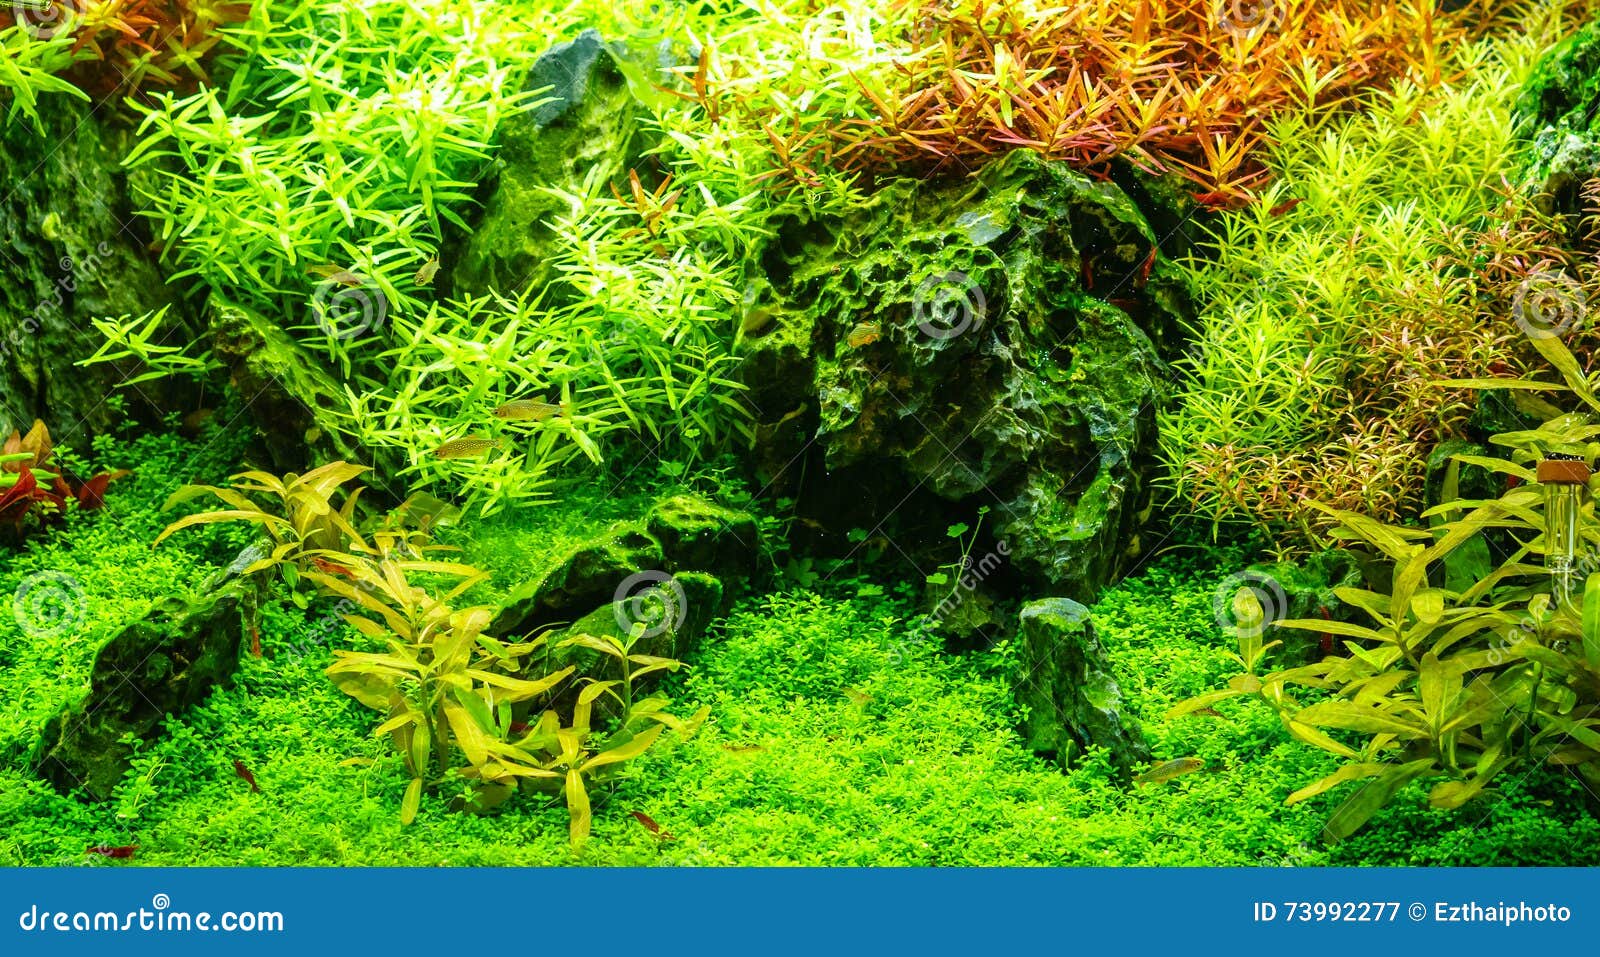 green beautiful planted tropical freshwater aquarium with fishes